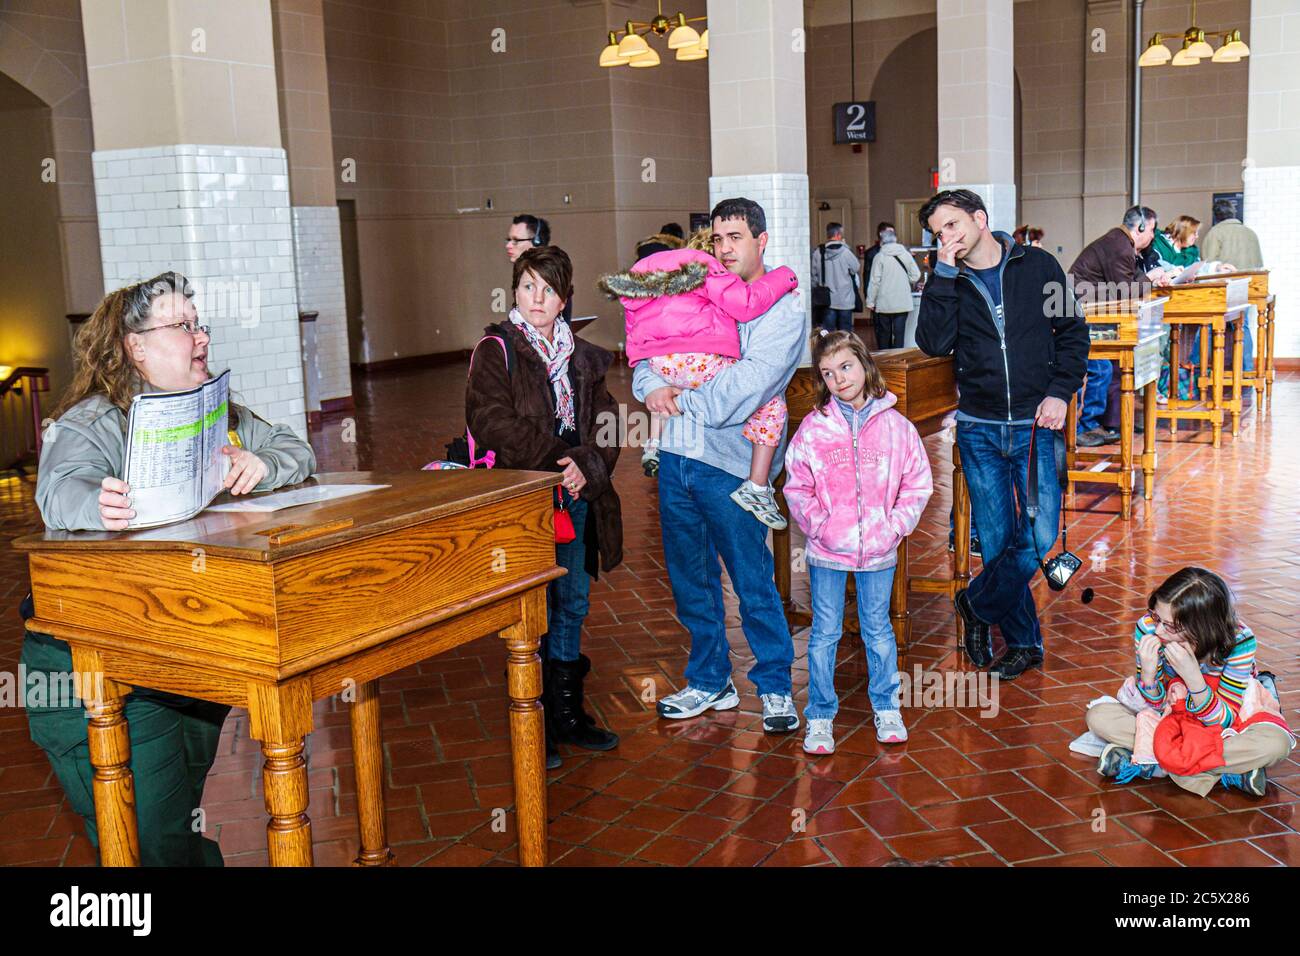 New York,New York City,NYC,Statue of Liberty National Monument,Ellis Island Immigration Museum,historic site,Great Hall,processing desk,man men male a Stock Photo